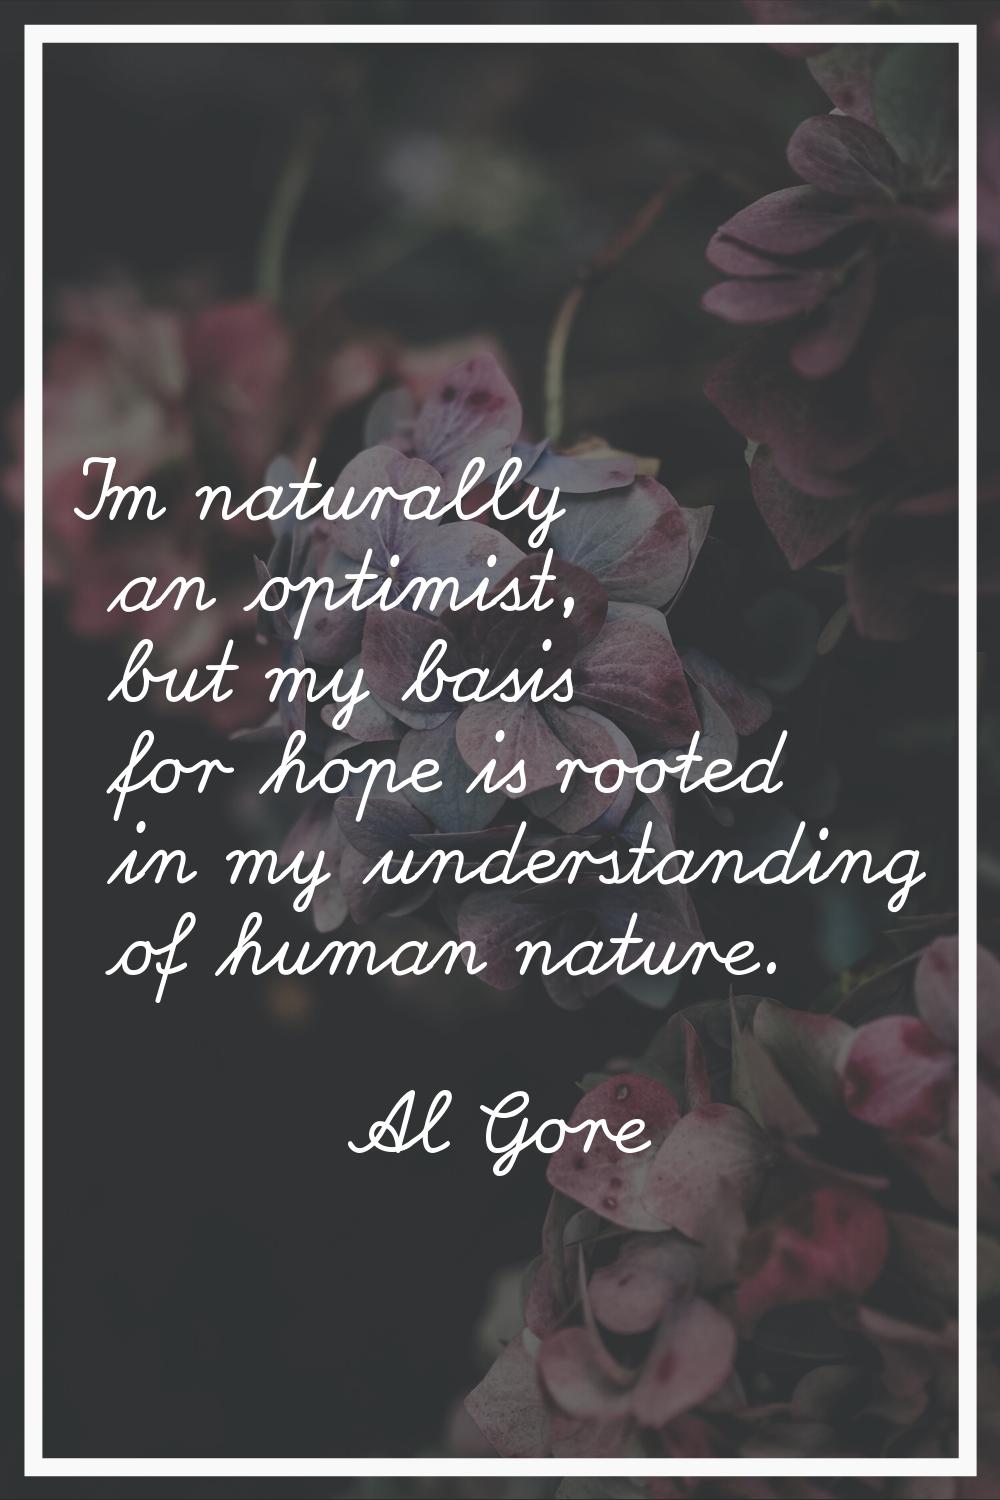 I'm naturally an optimist, but my basis for hope is rooted in my understanding of human nature.